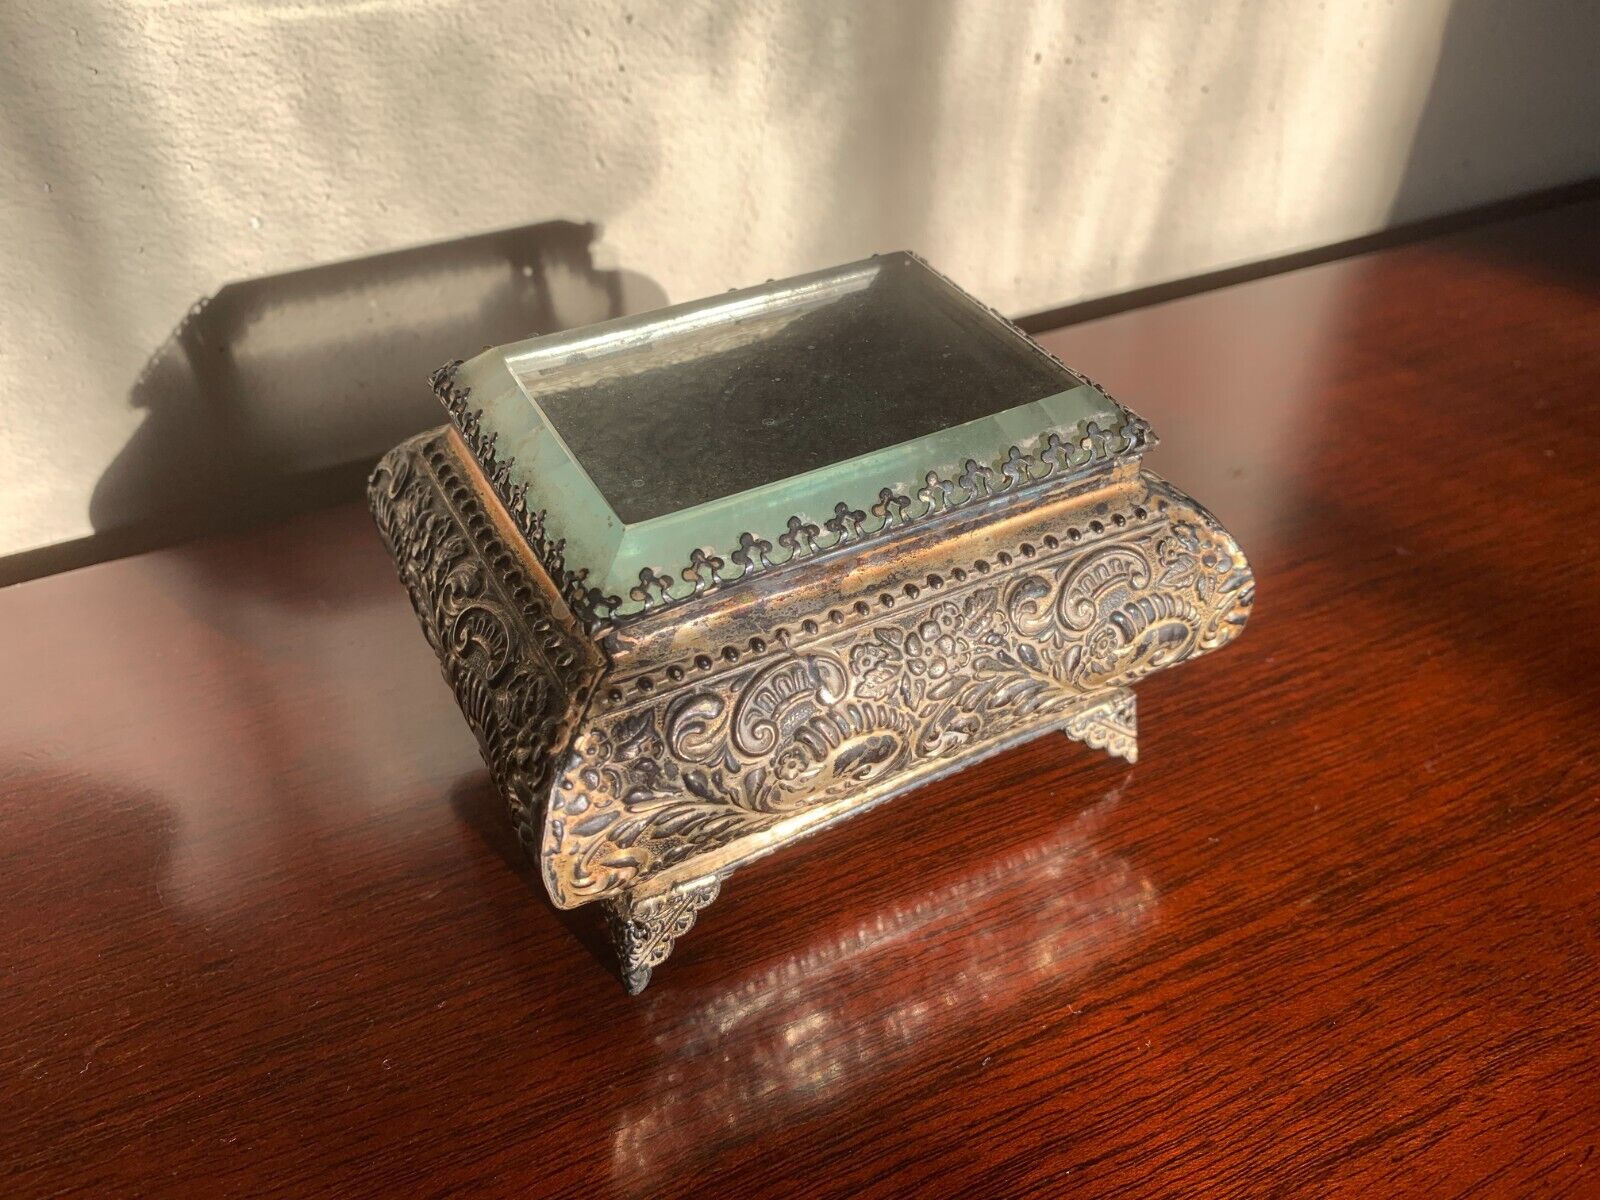 Antique Victorian Beveled Glass and Repoussé Trinket Jewelry Box